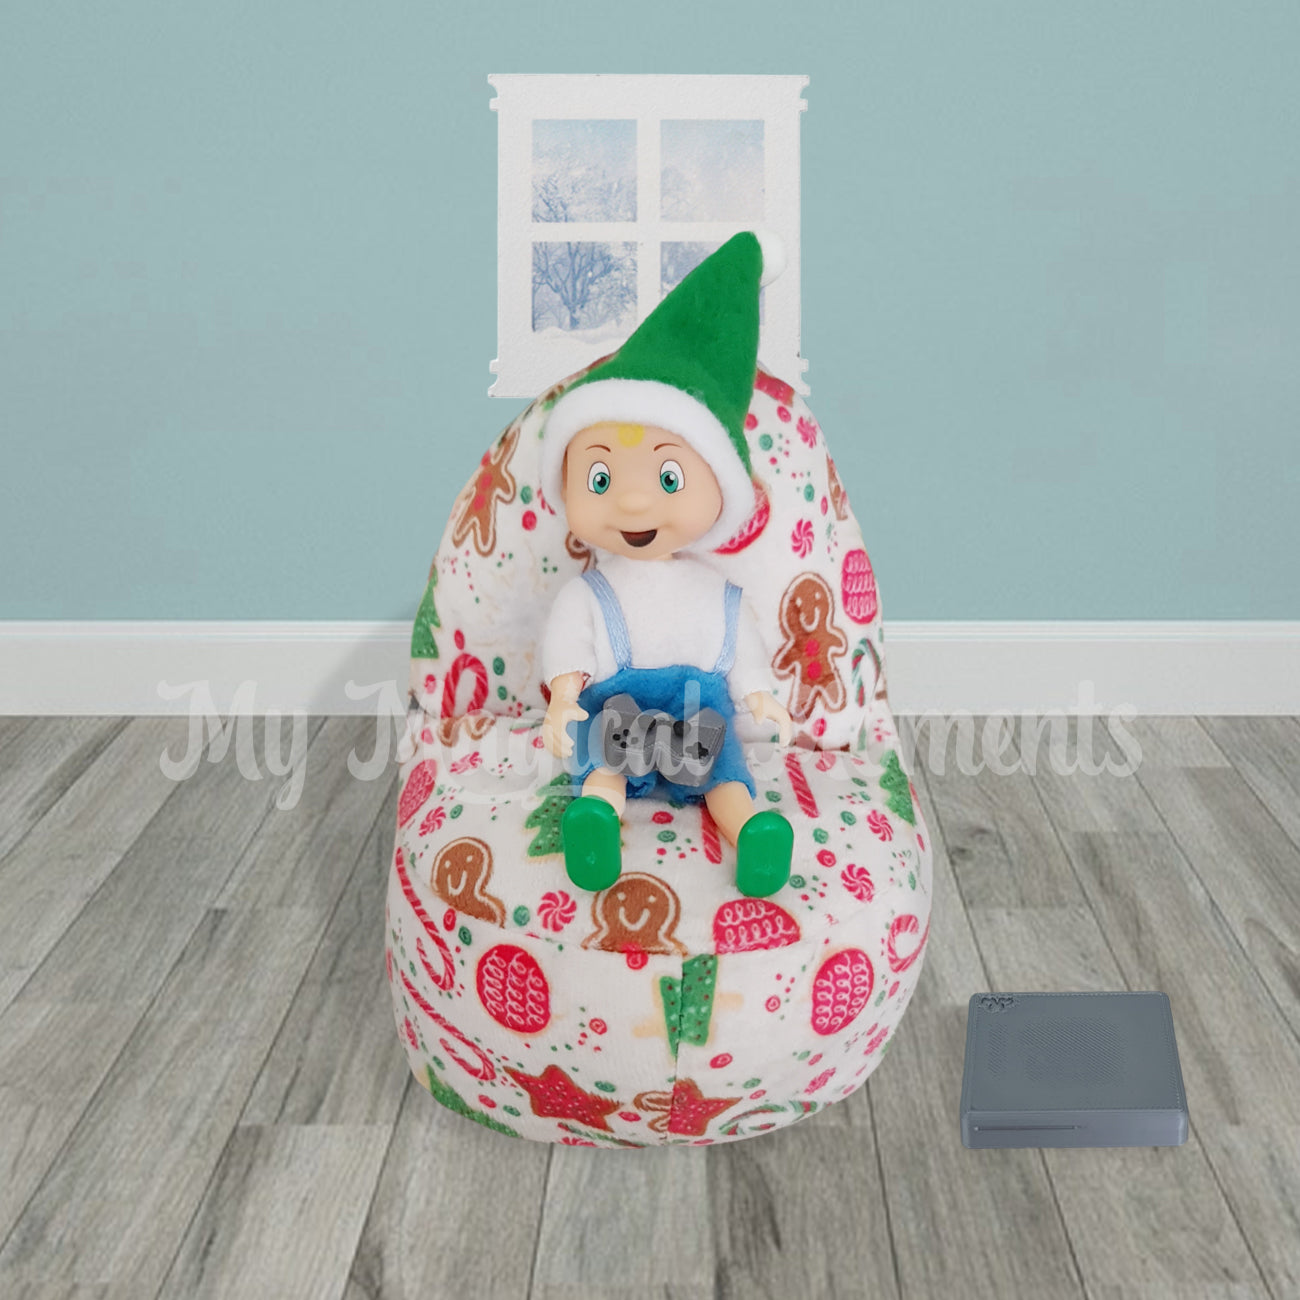 Elf toddler playing a video game on a bean bag